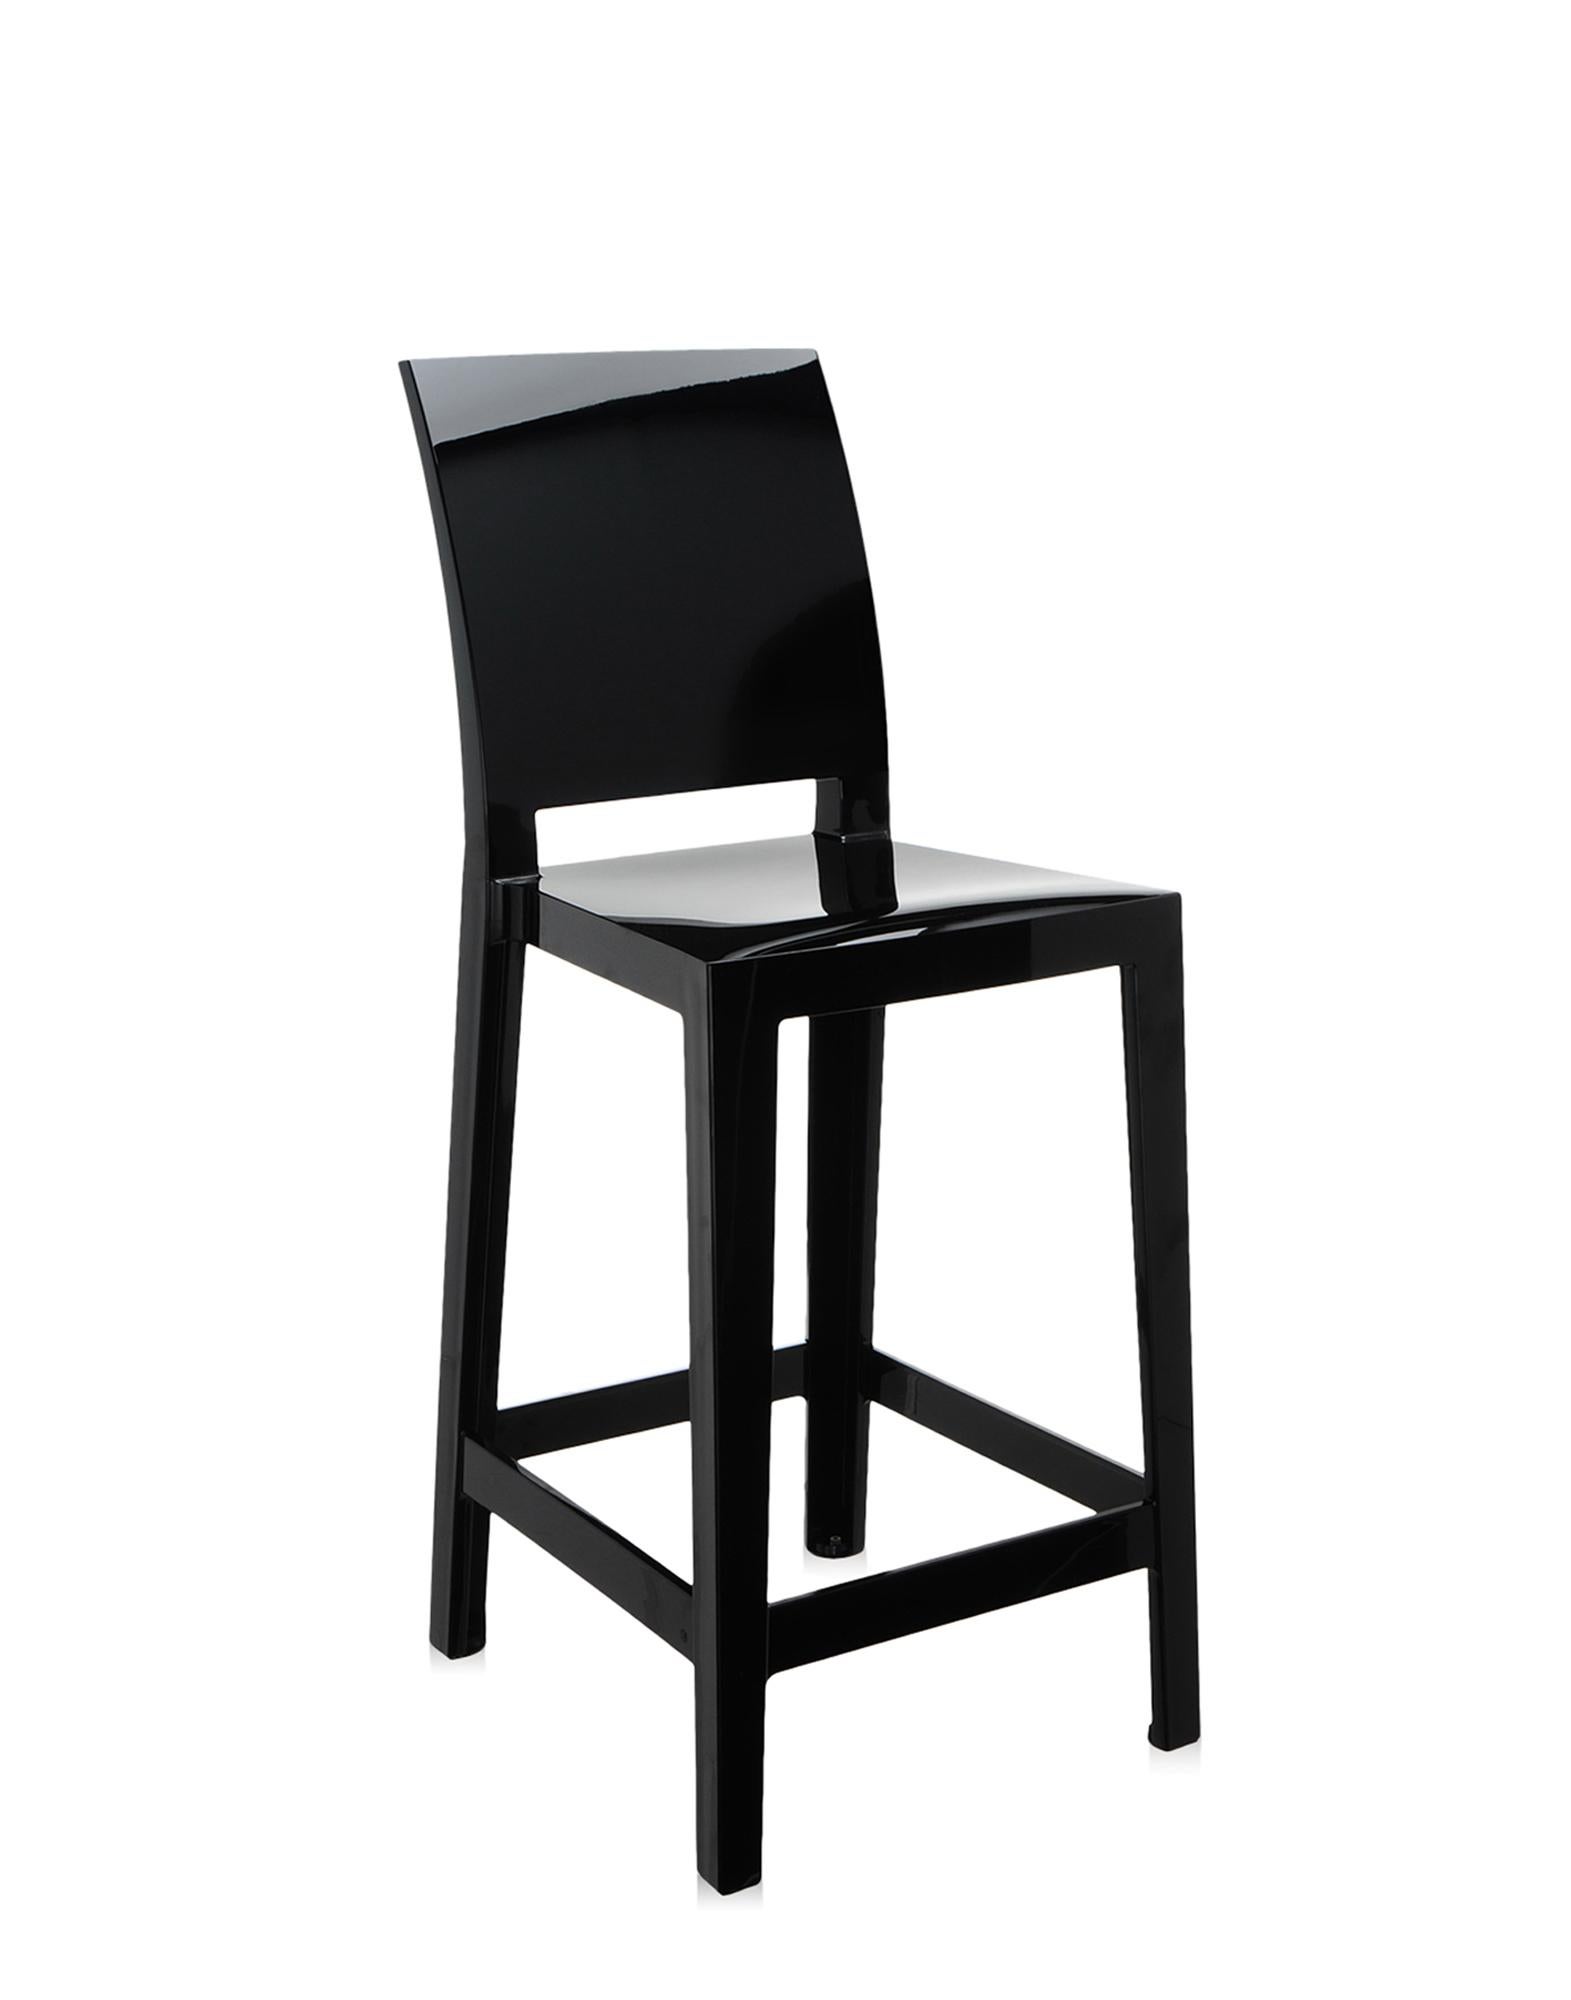 If you want to sip a drink at the bar in peace and quiet, you need a comfortable tall stool with a back to lean against. Sometimes one drink is not enough - and you need 